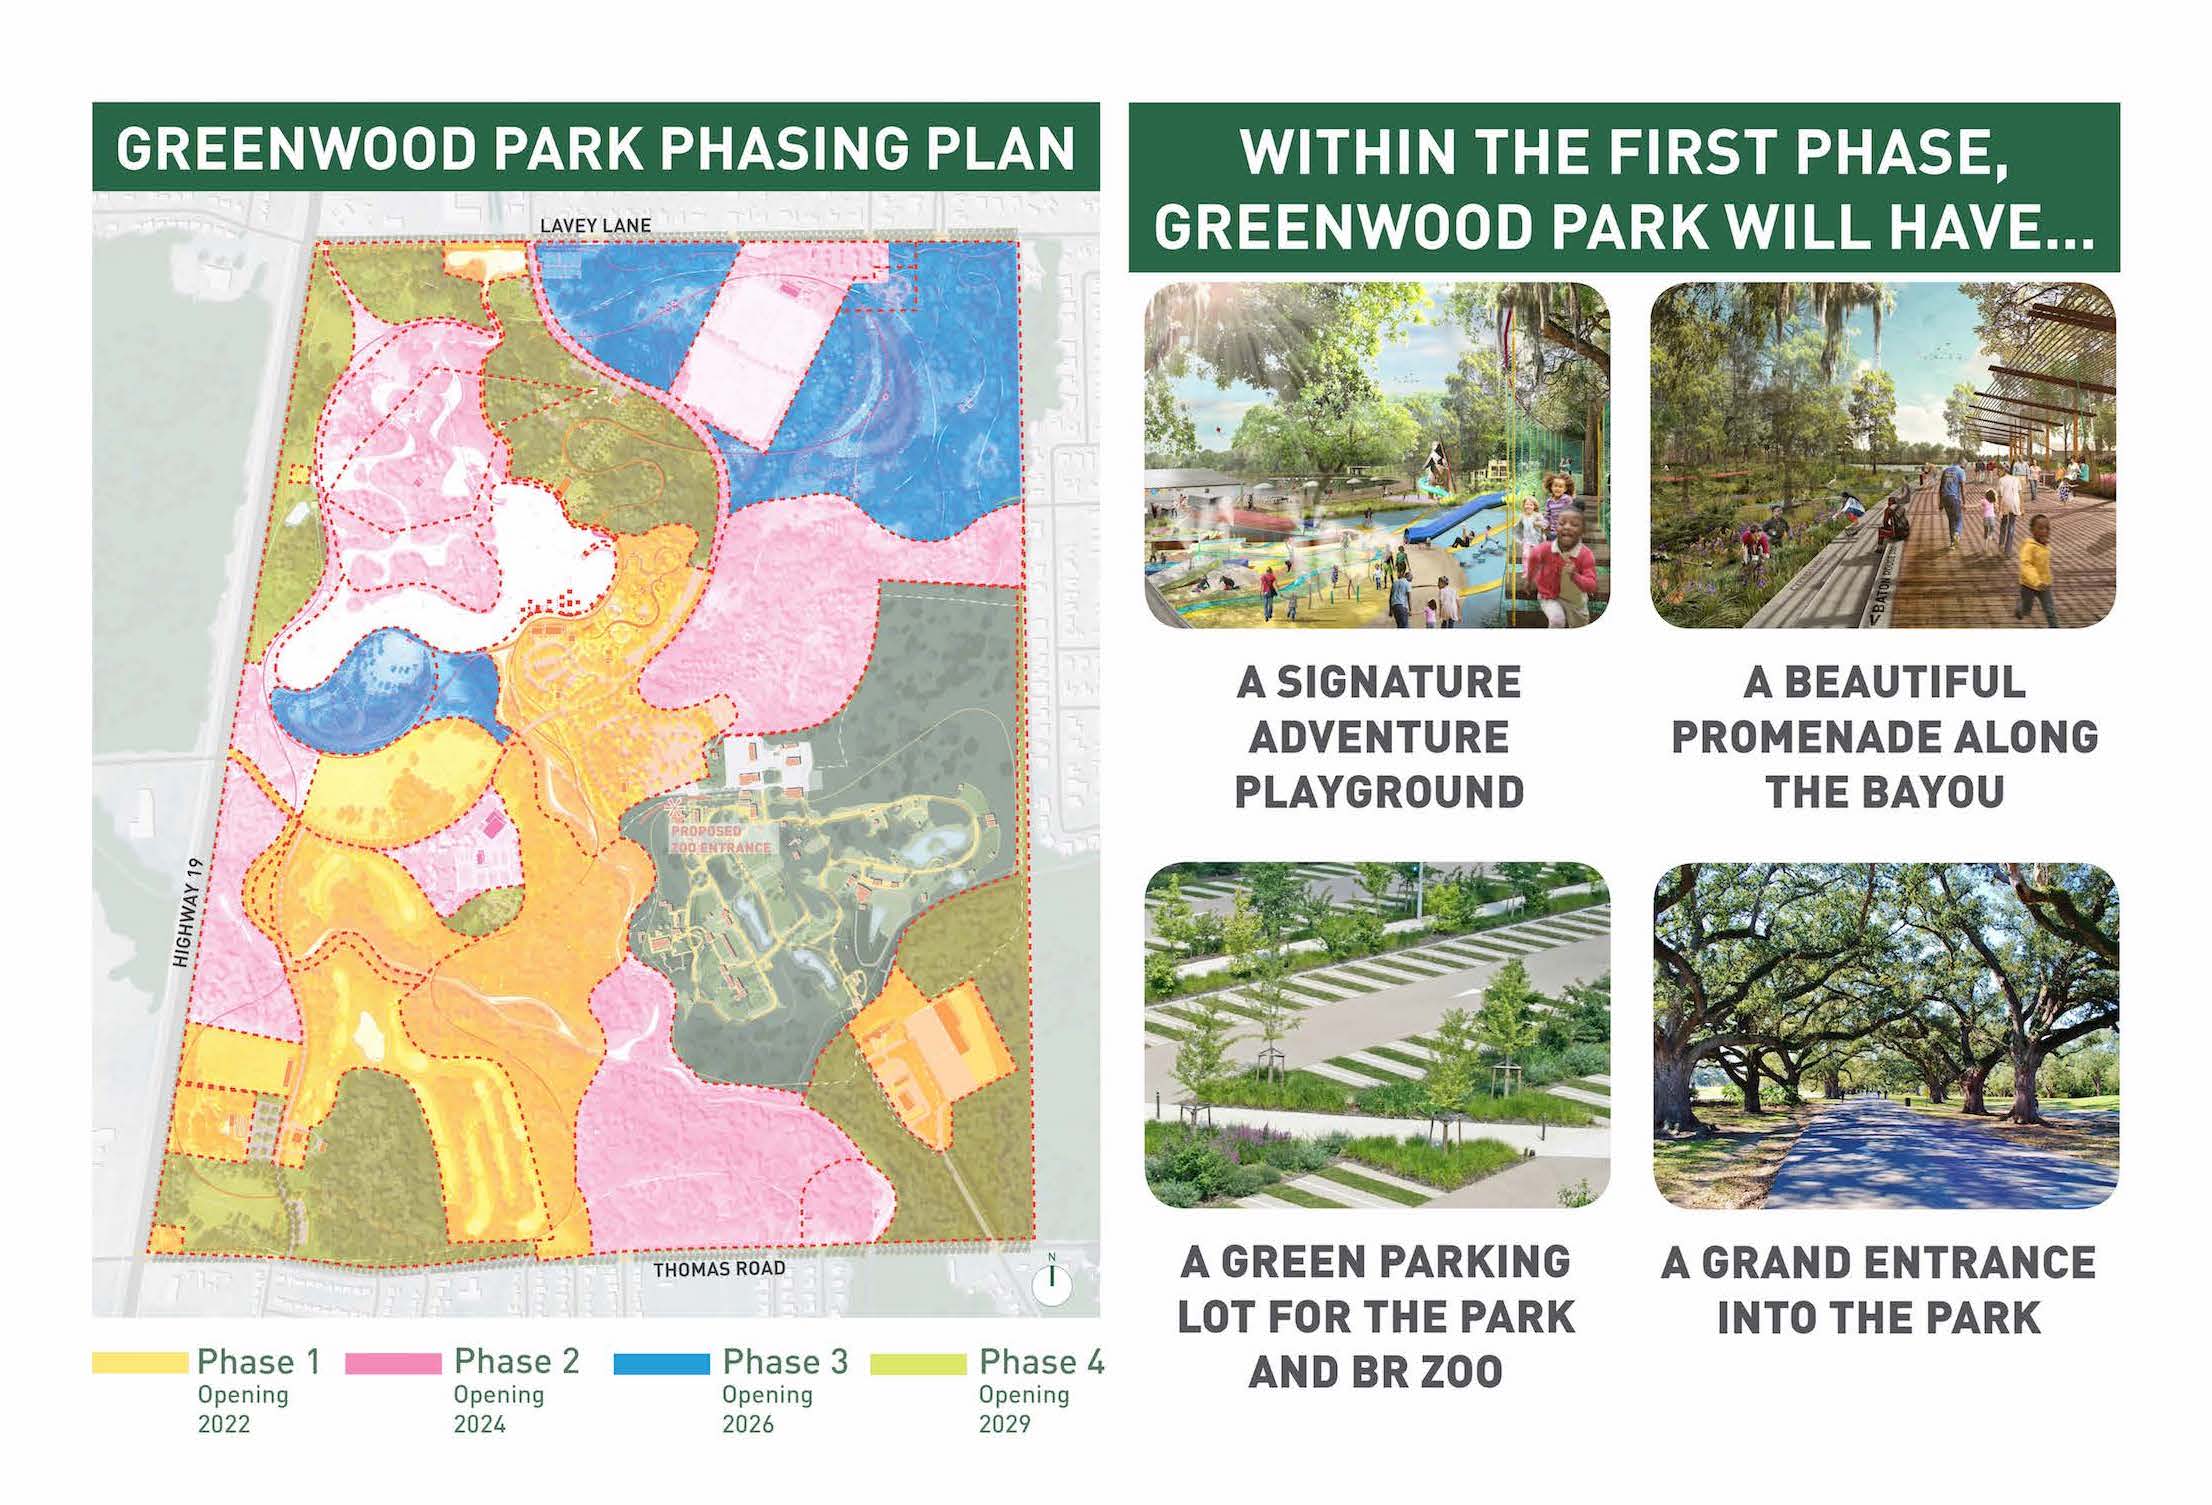 First Phase of Greenwood Plan to include elements listed in project plan; image has colored map and spirit images